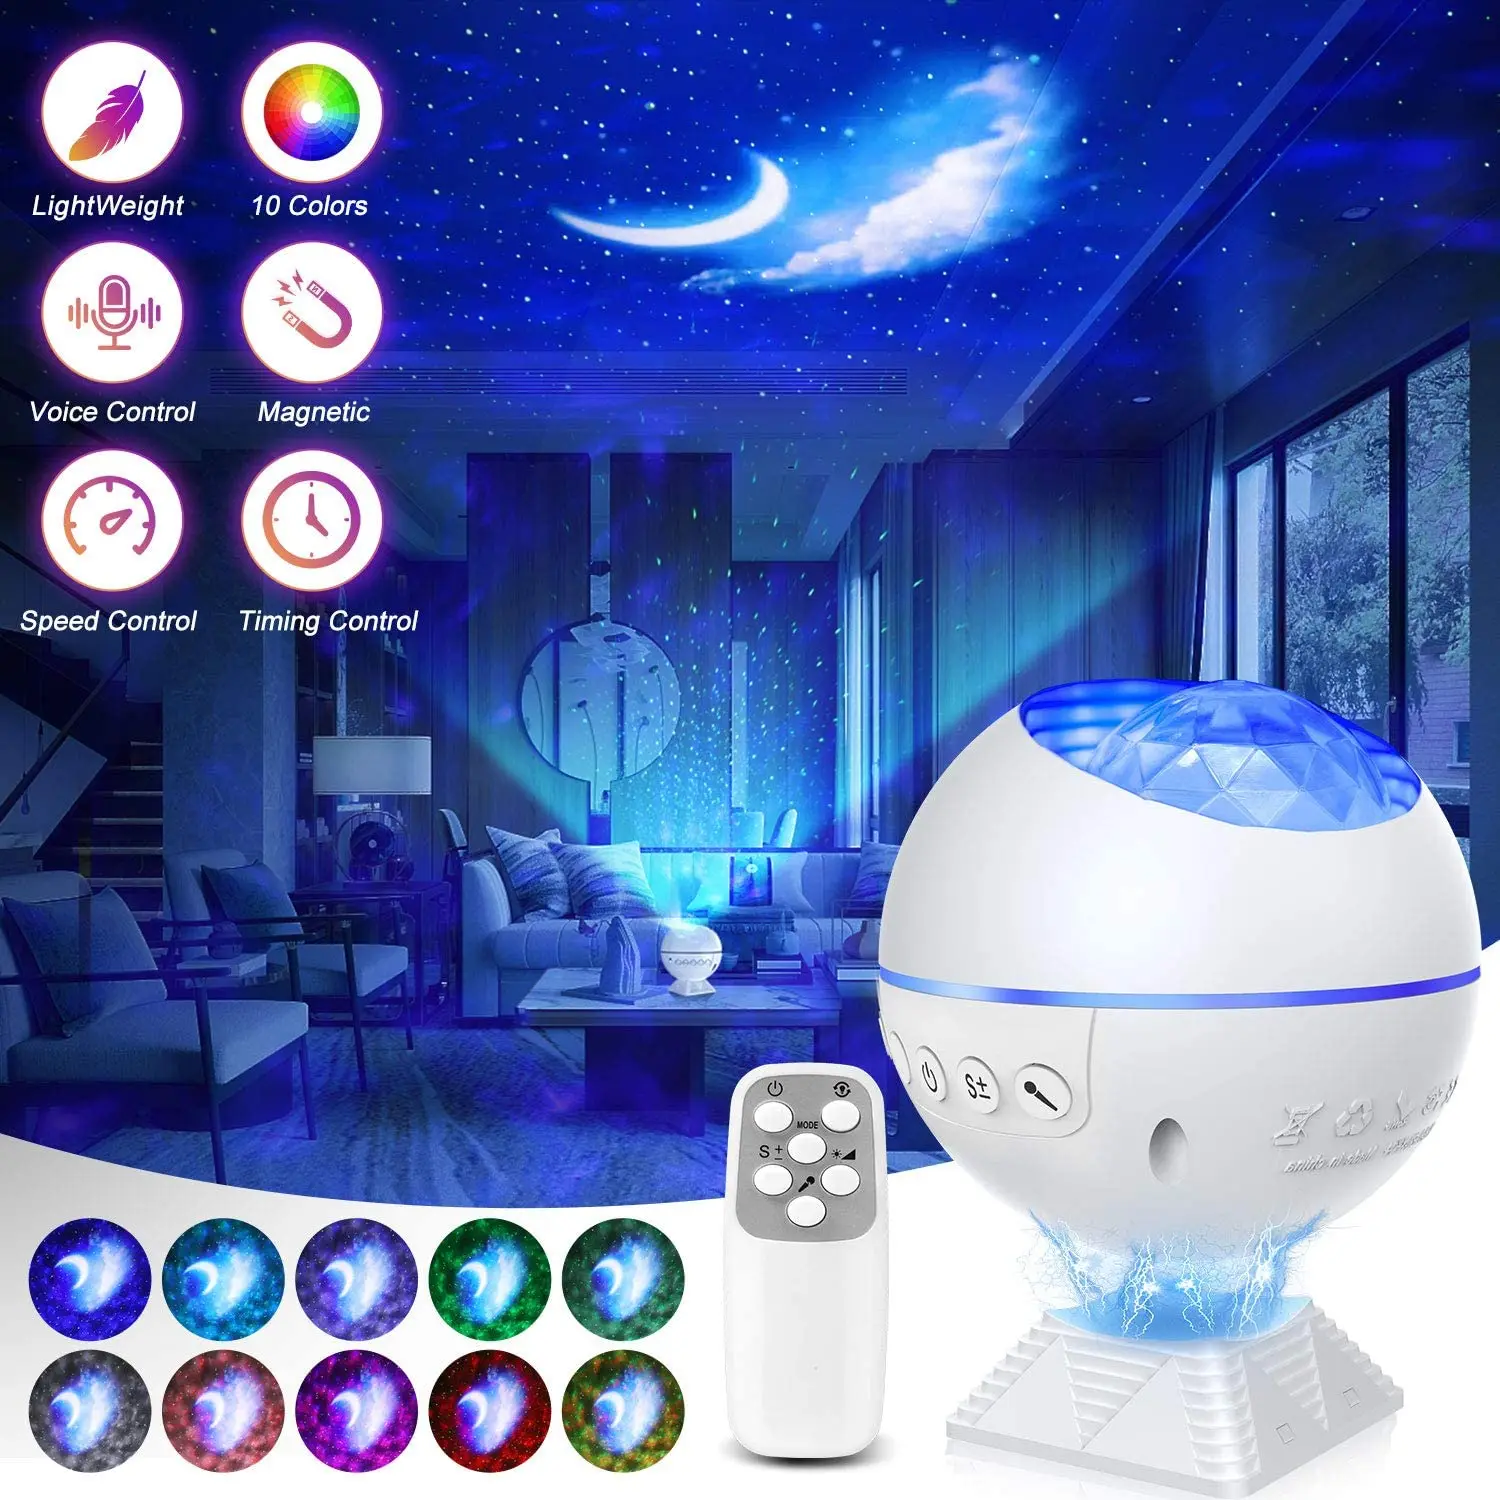 Star Galaxy Projector Light LED Laser Projector Disco Ball Lights Moon Cloud Bedroom Starry Sky Night Light with Remote Control